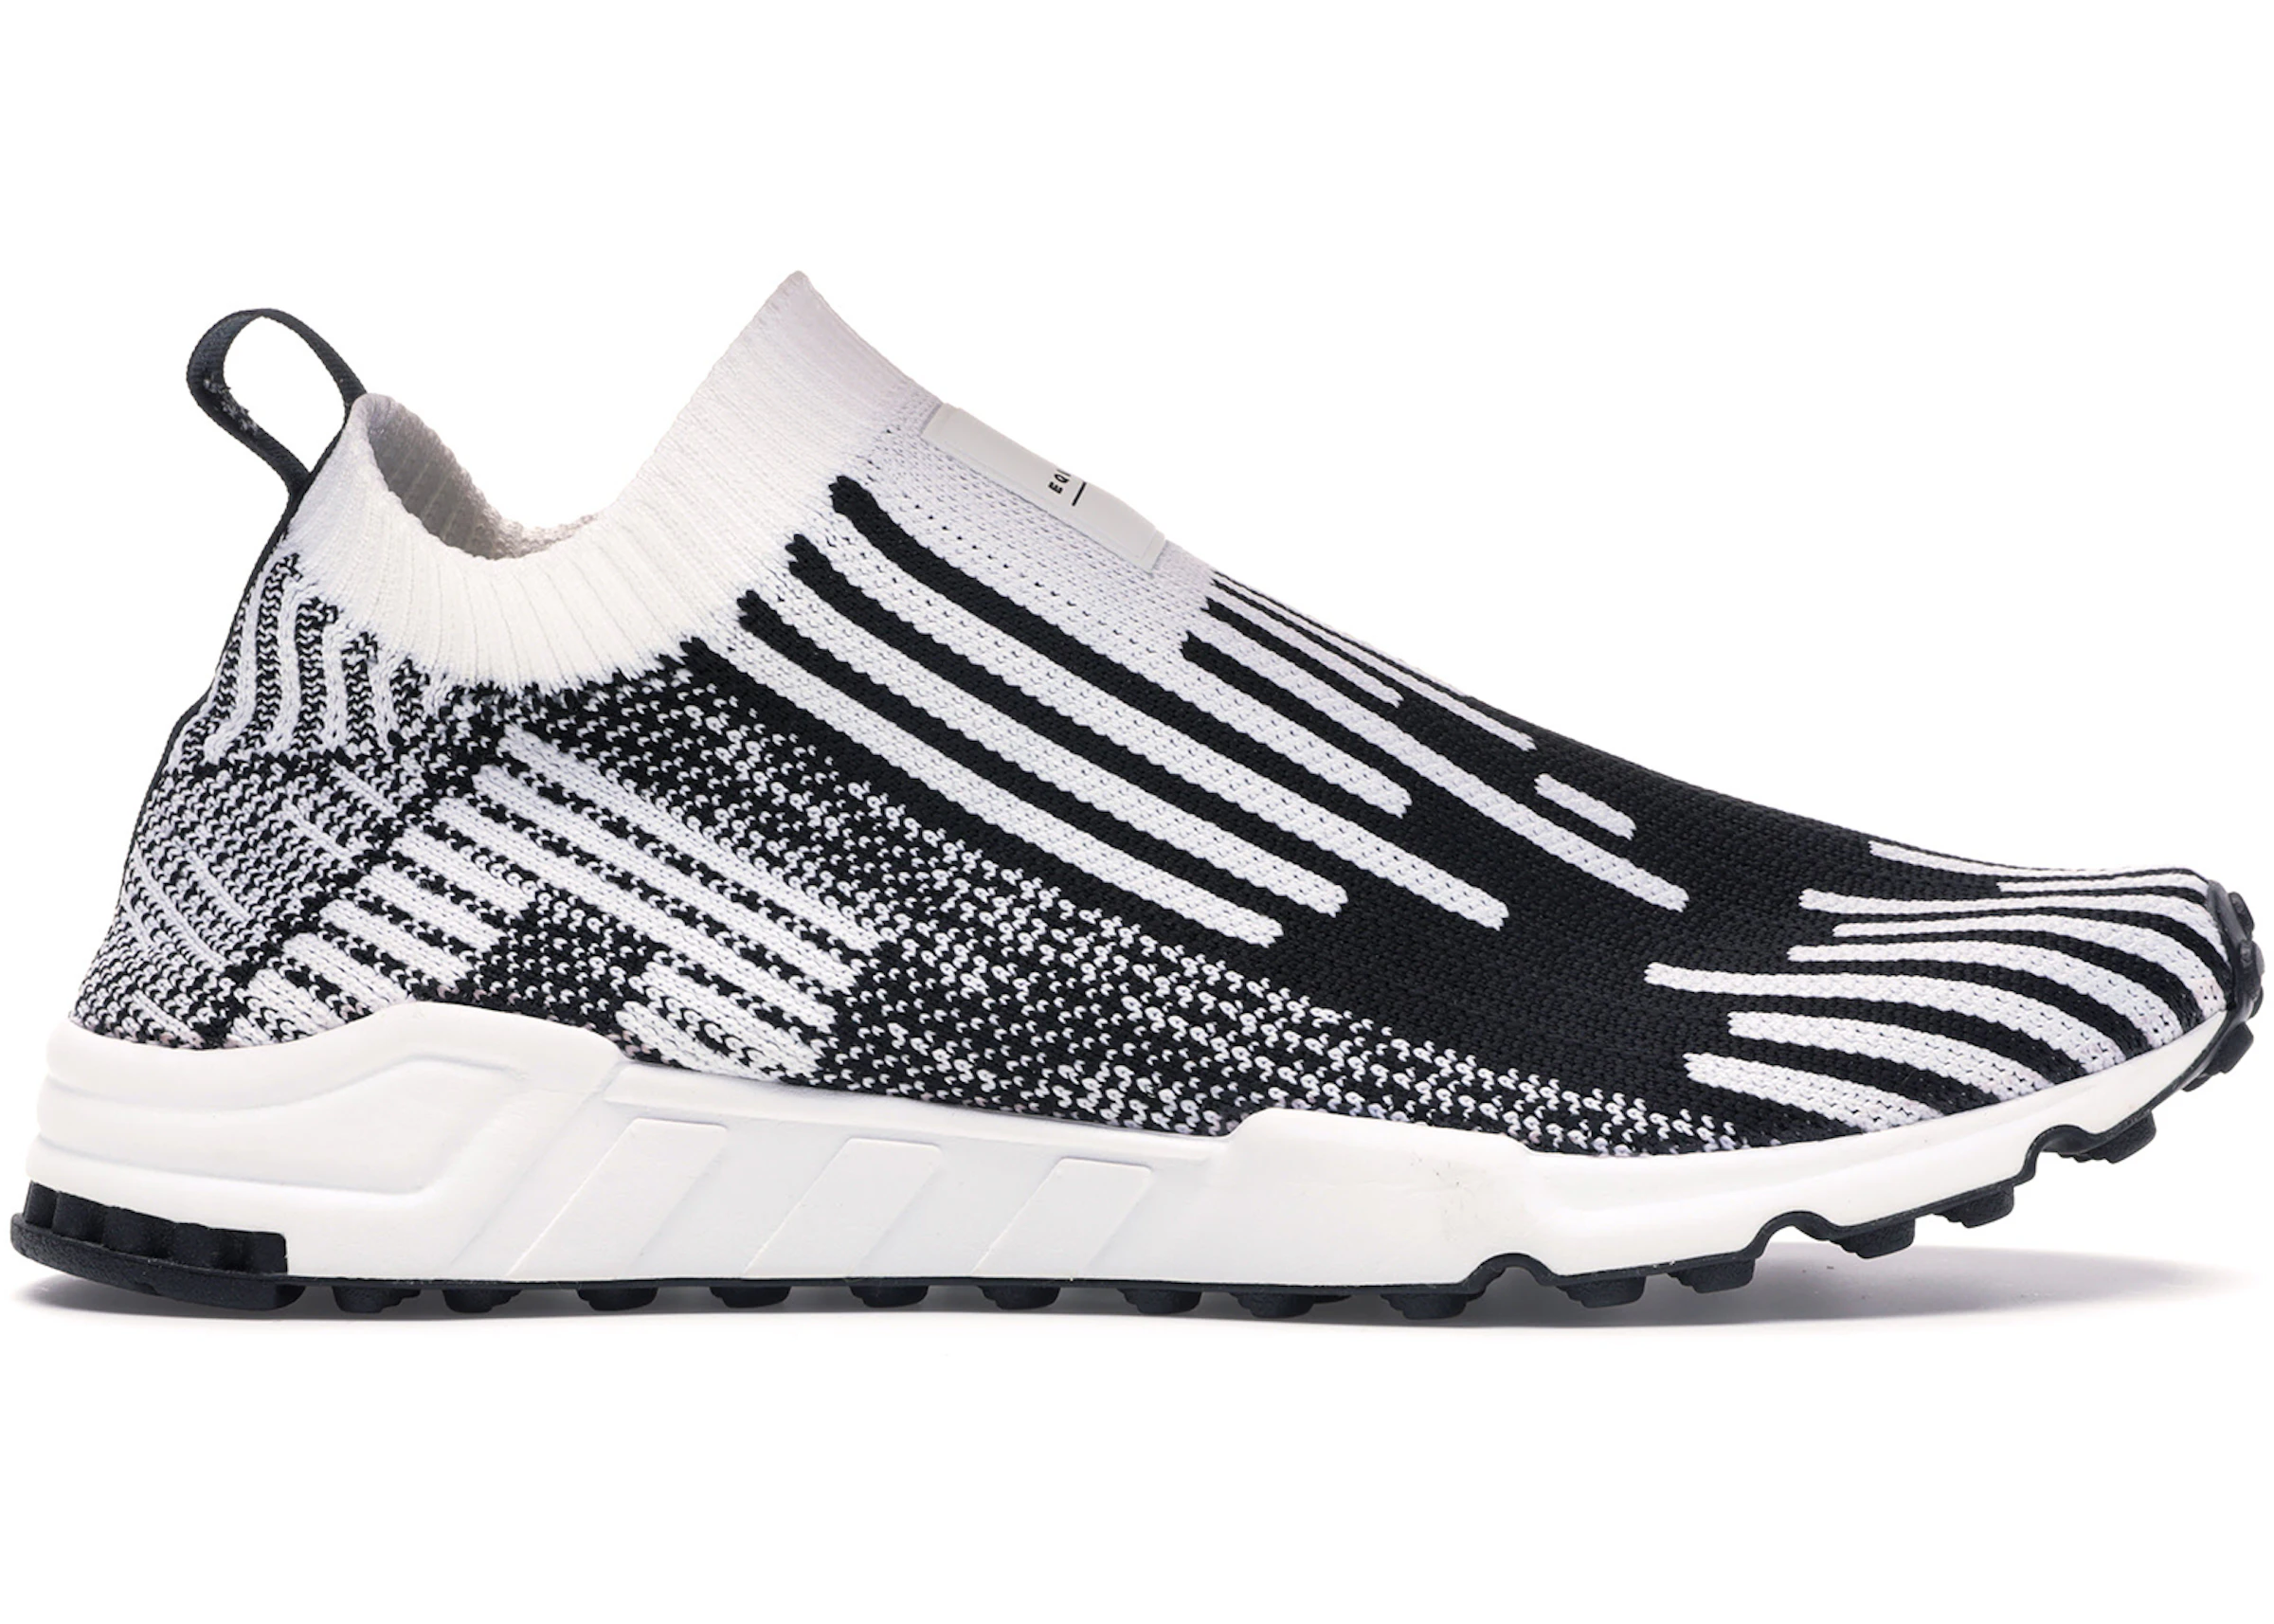 Can not input under adidas EQT Support Sock Cloud White Core Black - B37524 - US